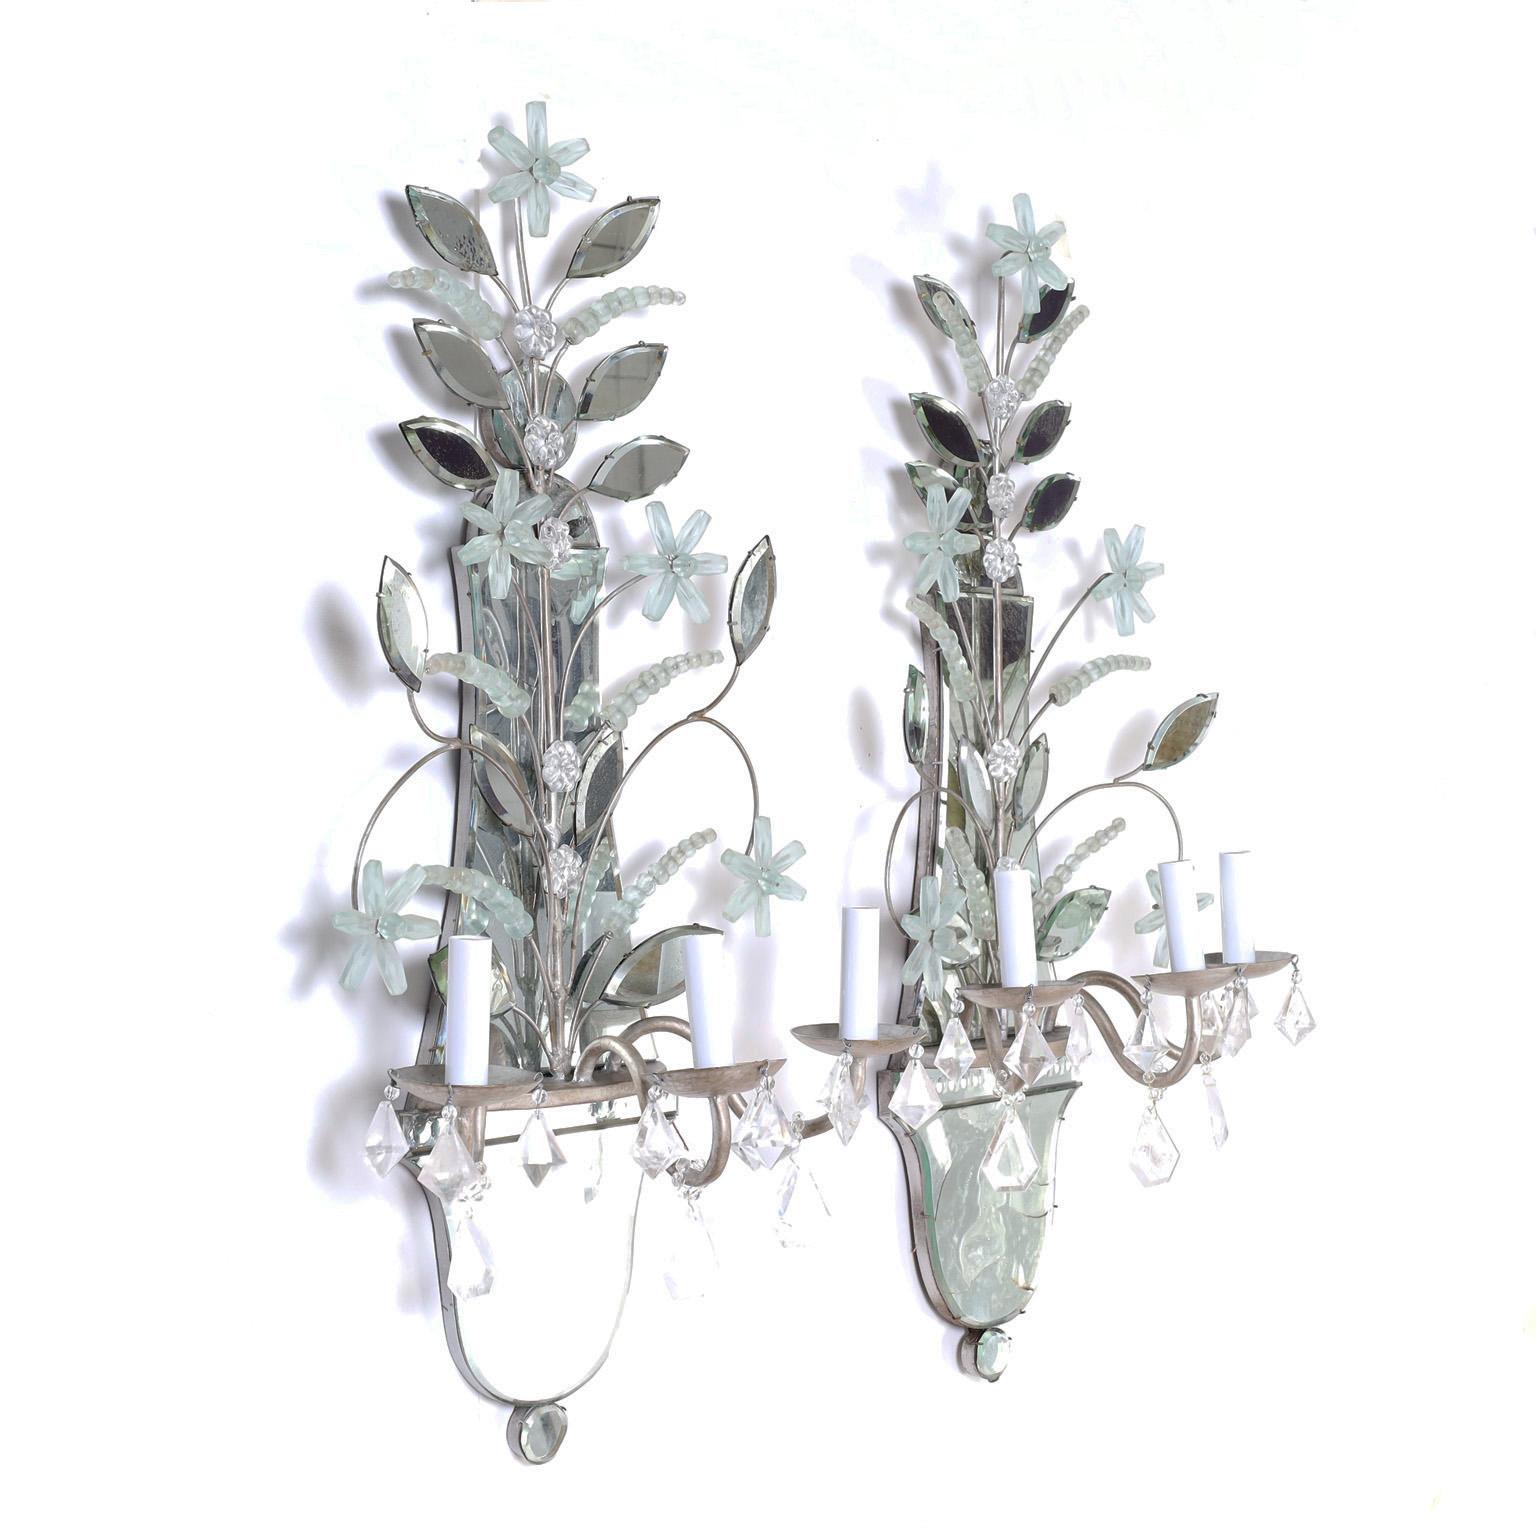 Dramatic pair of vintage Venetian style Italian wall sconces with Classic mirrored backplates featuring frosted glass flowers, beads and cut rock crystals hanging from the three metal arms.